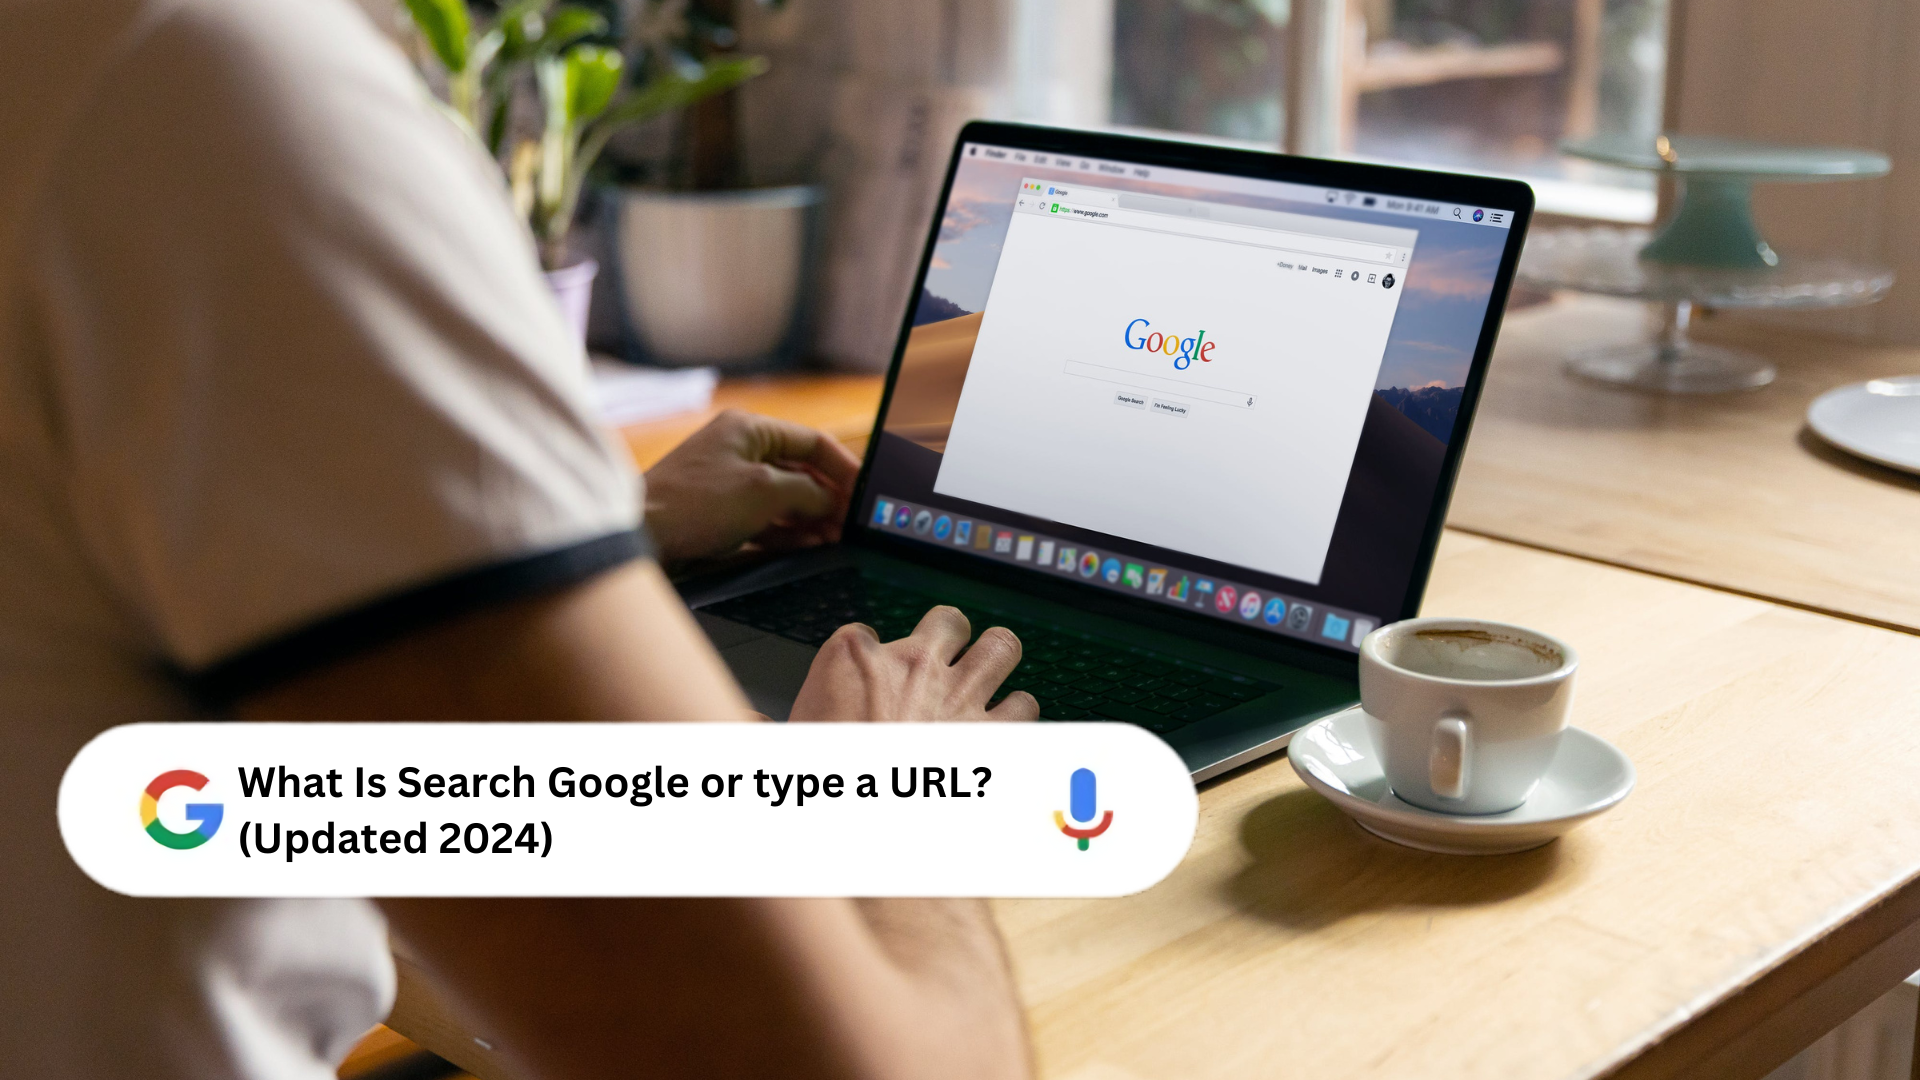 What Is Search Google or type a URL?